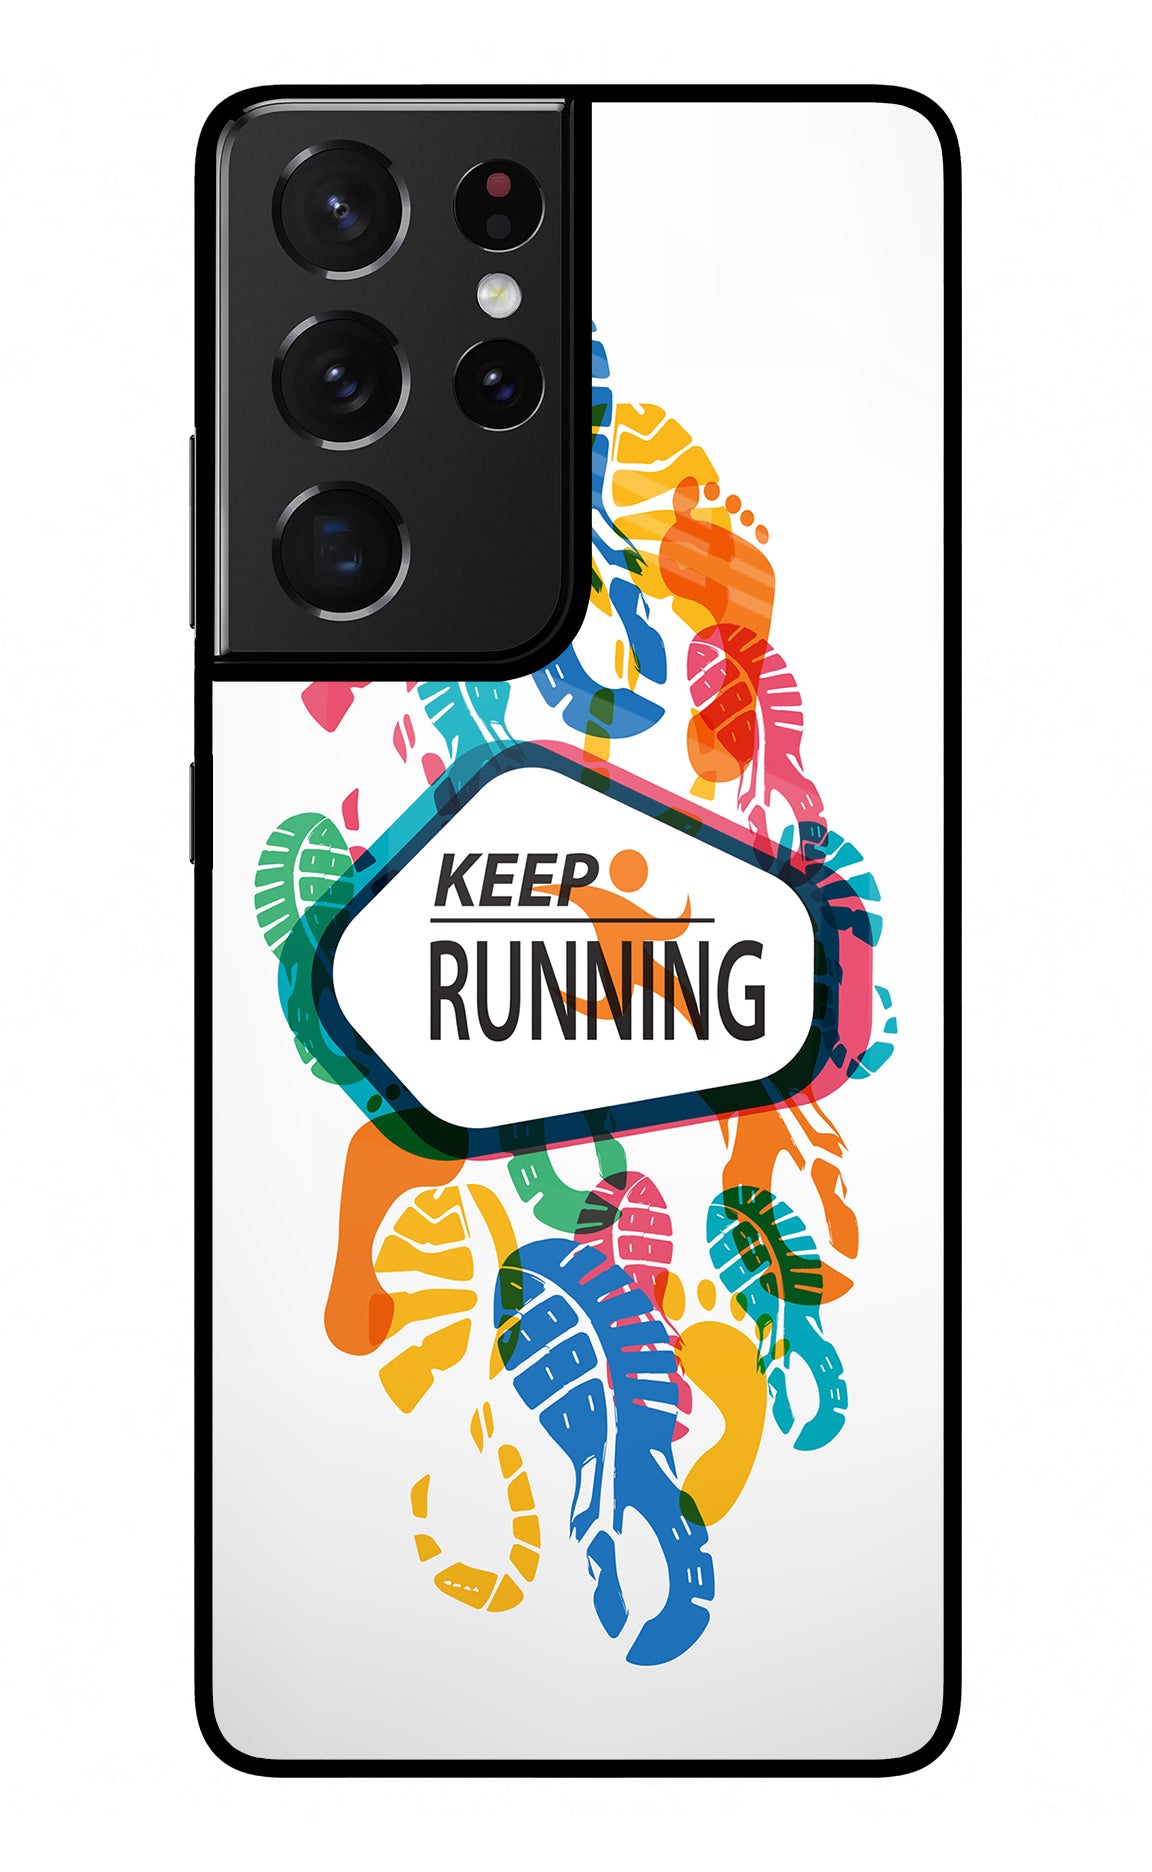 Keep Running Samsung S21 Ultra Back Cover